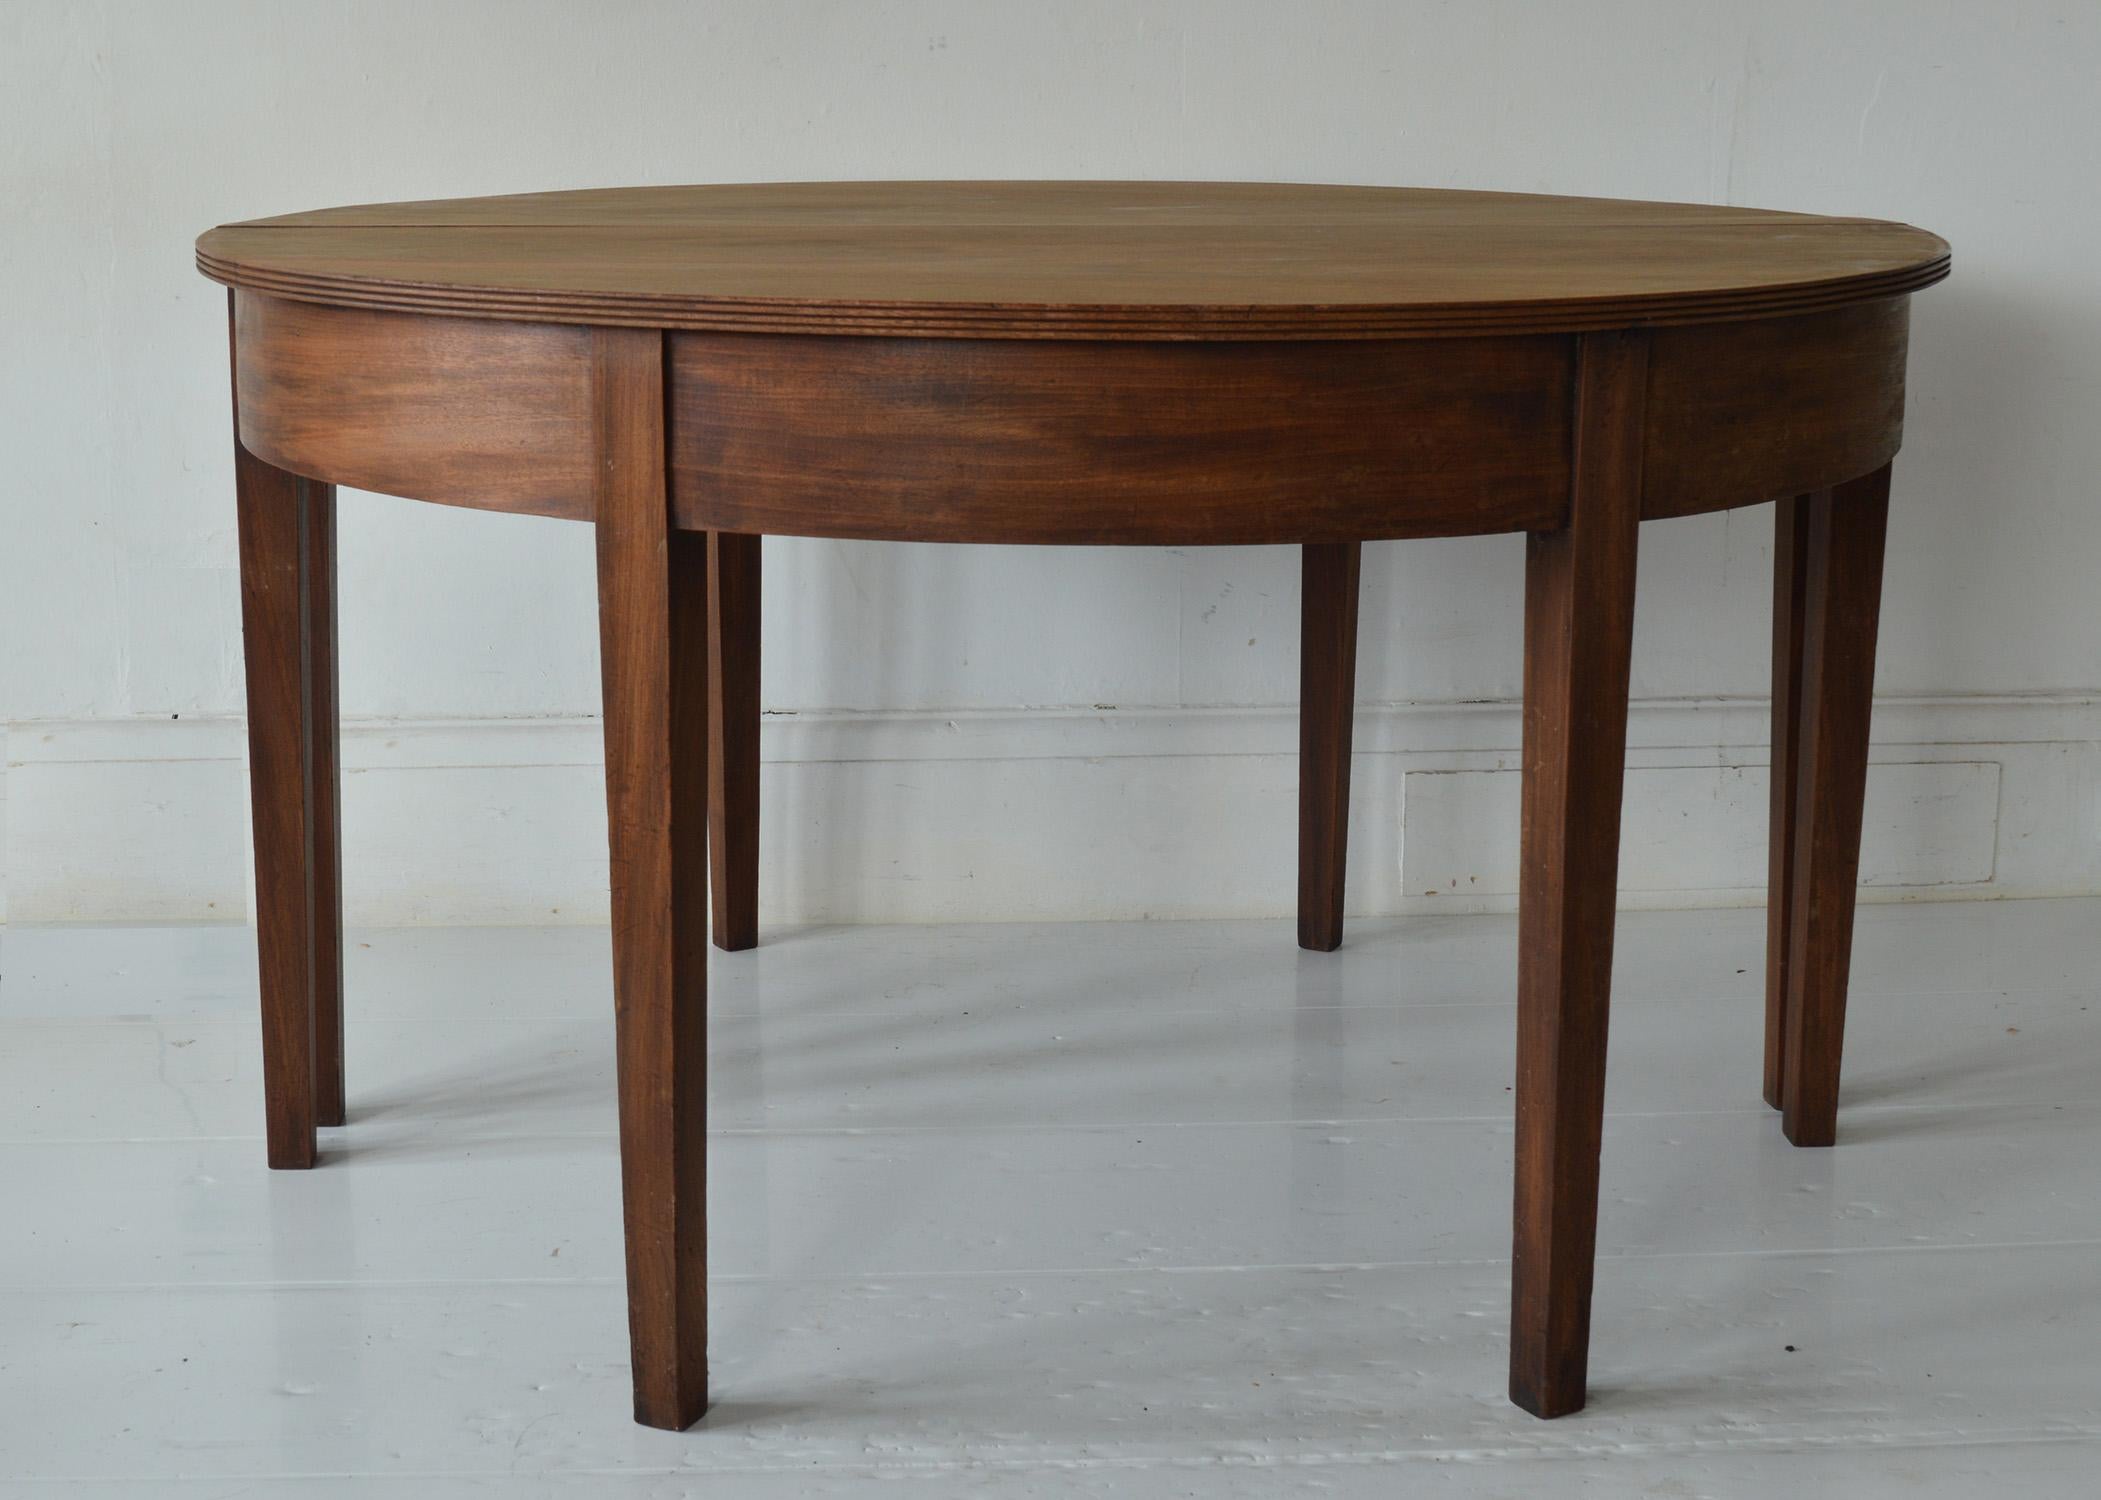 Fabulous large round table. Made from Cuban mahogany.

As round it would sit six. There is an extra leaf so would seat eight comfortably. You can also use it as a pair of demi-lunes.

Great simple lines. I particularly like the reeded edge on the